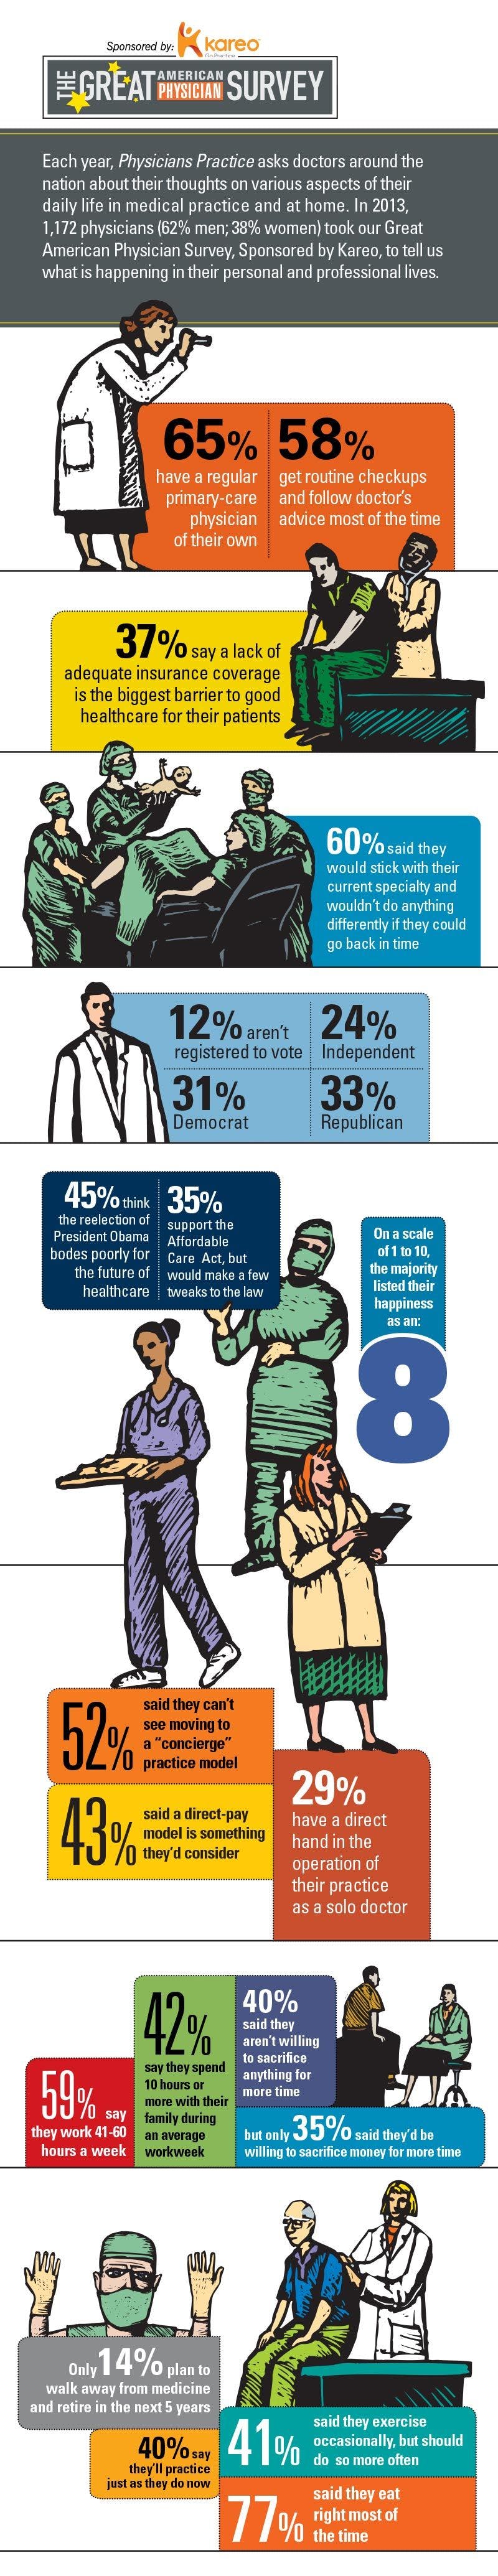 2013 Great American Physician Survey